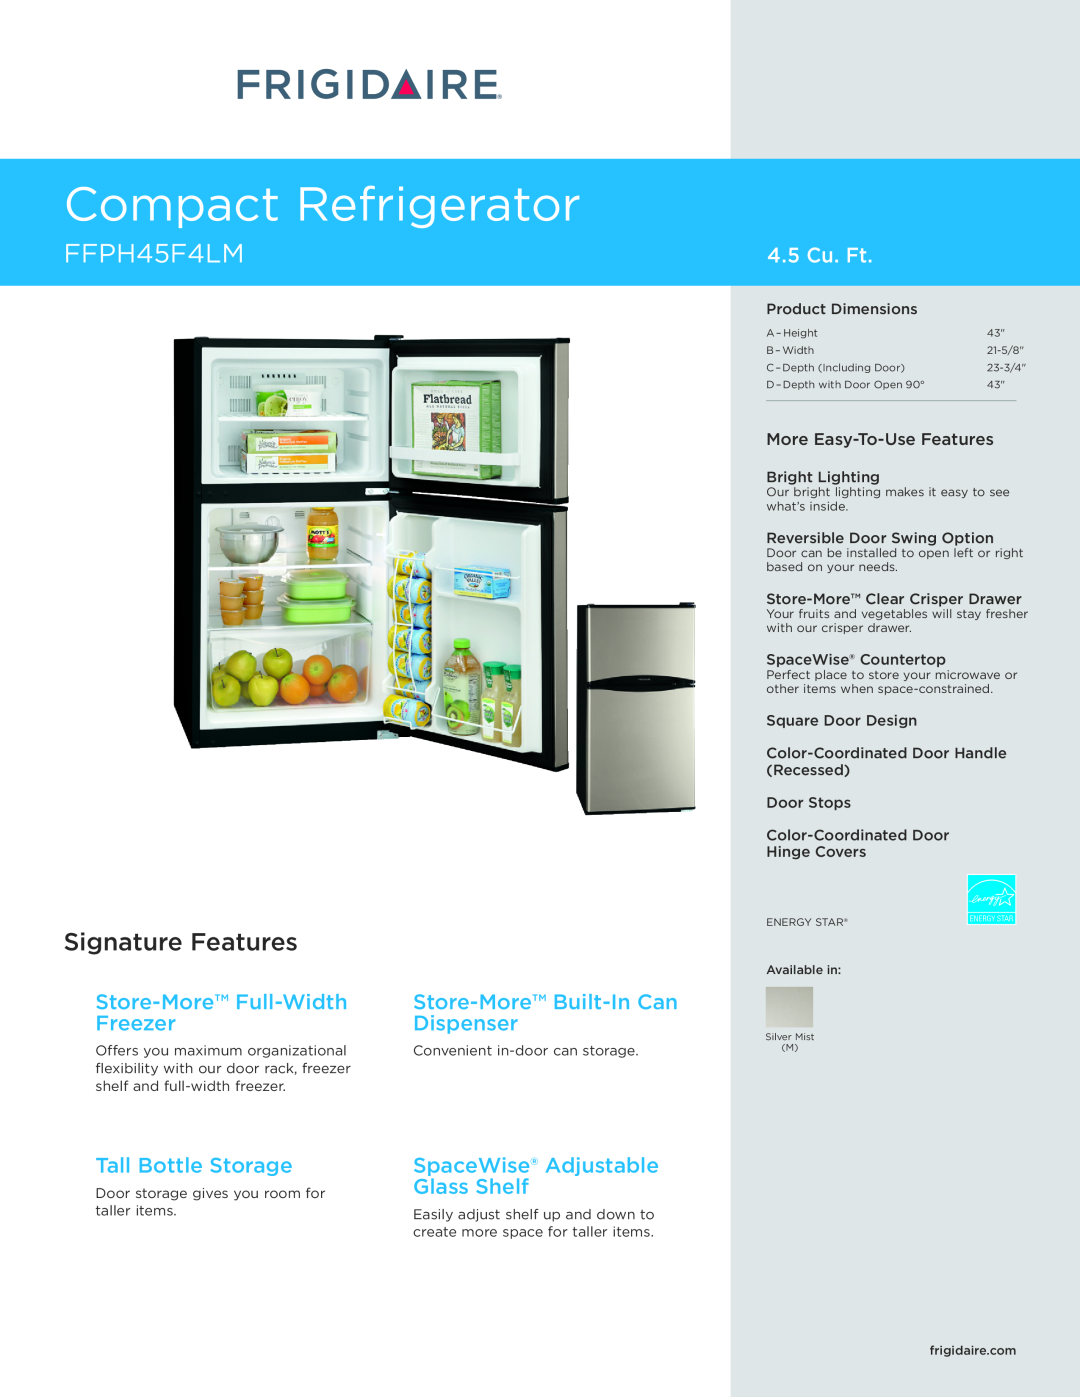 Frigidaire FFPH45F4LM dimensions Compact Refrigerator, Signature Features, 4.5 Cu. Ft, Store-More Full-Width, Freezer 